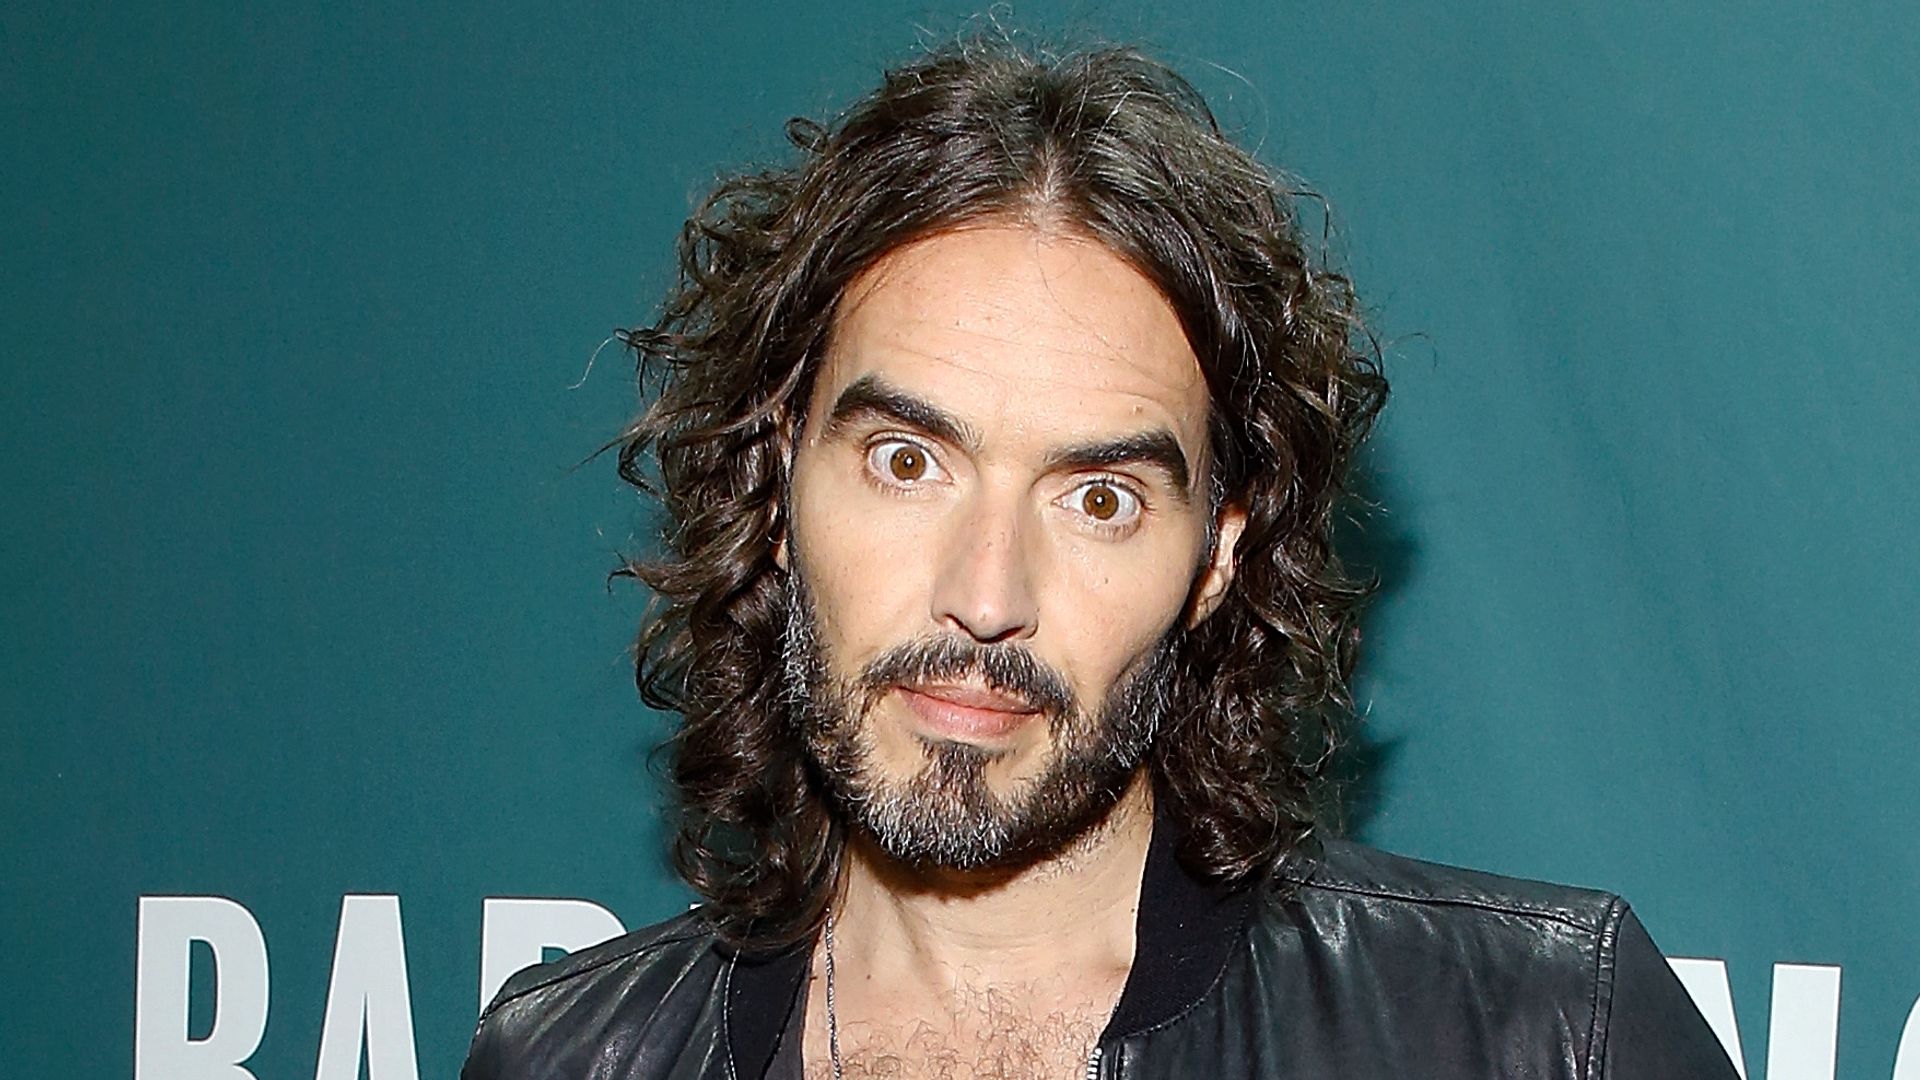 Russell Brand in leather jacket and shirt